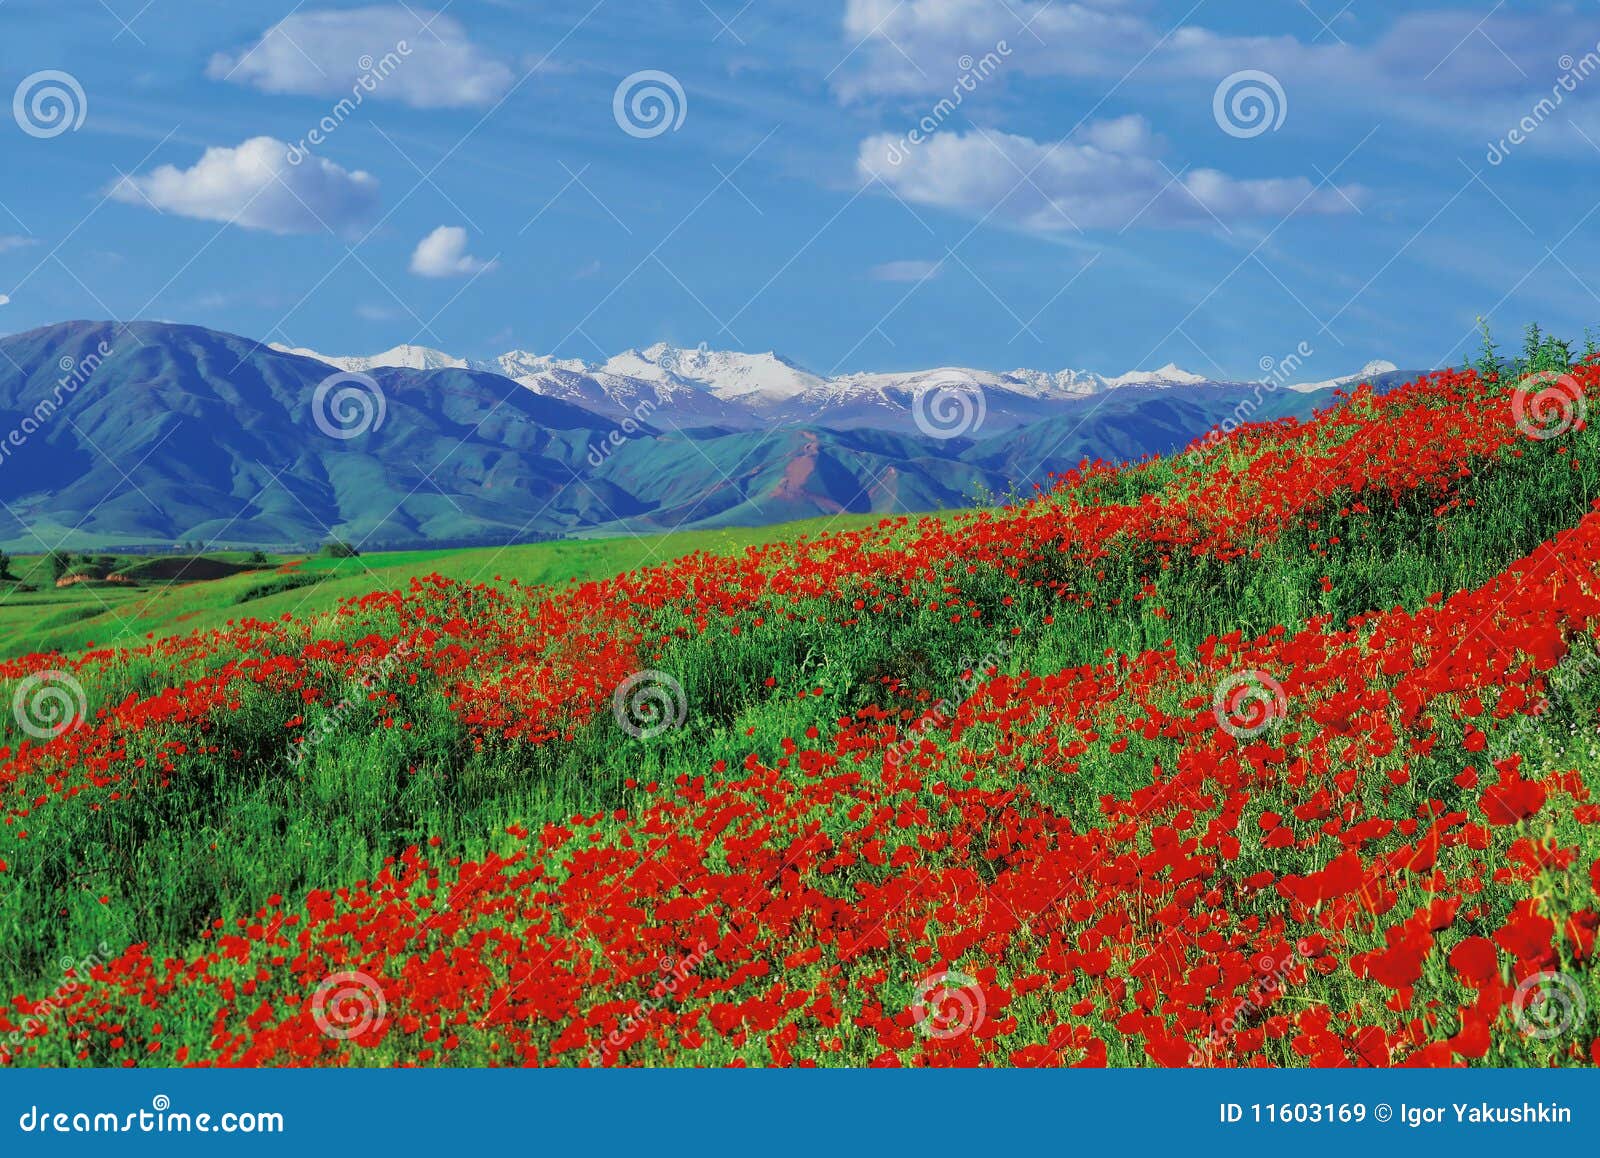 Poppies fields stock image. Image of lovely, colored - 11603169